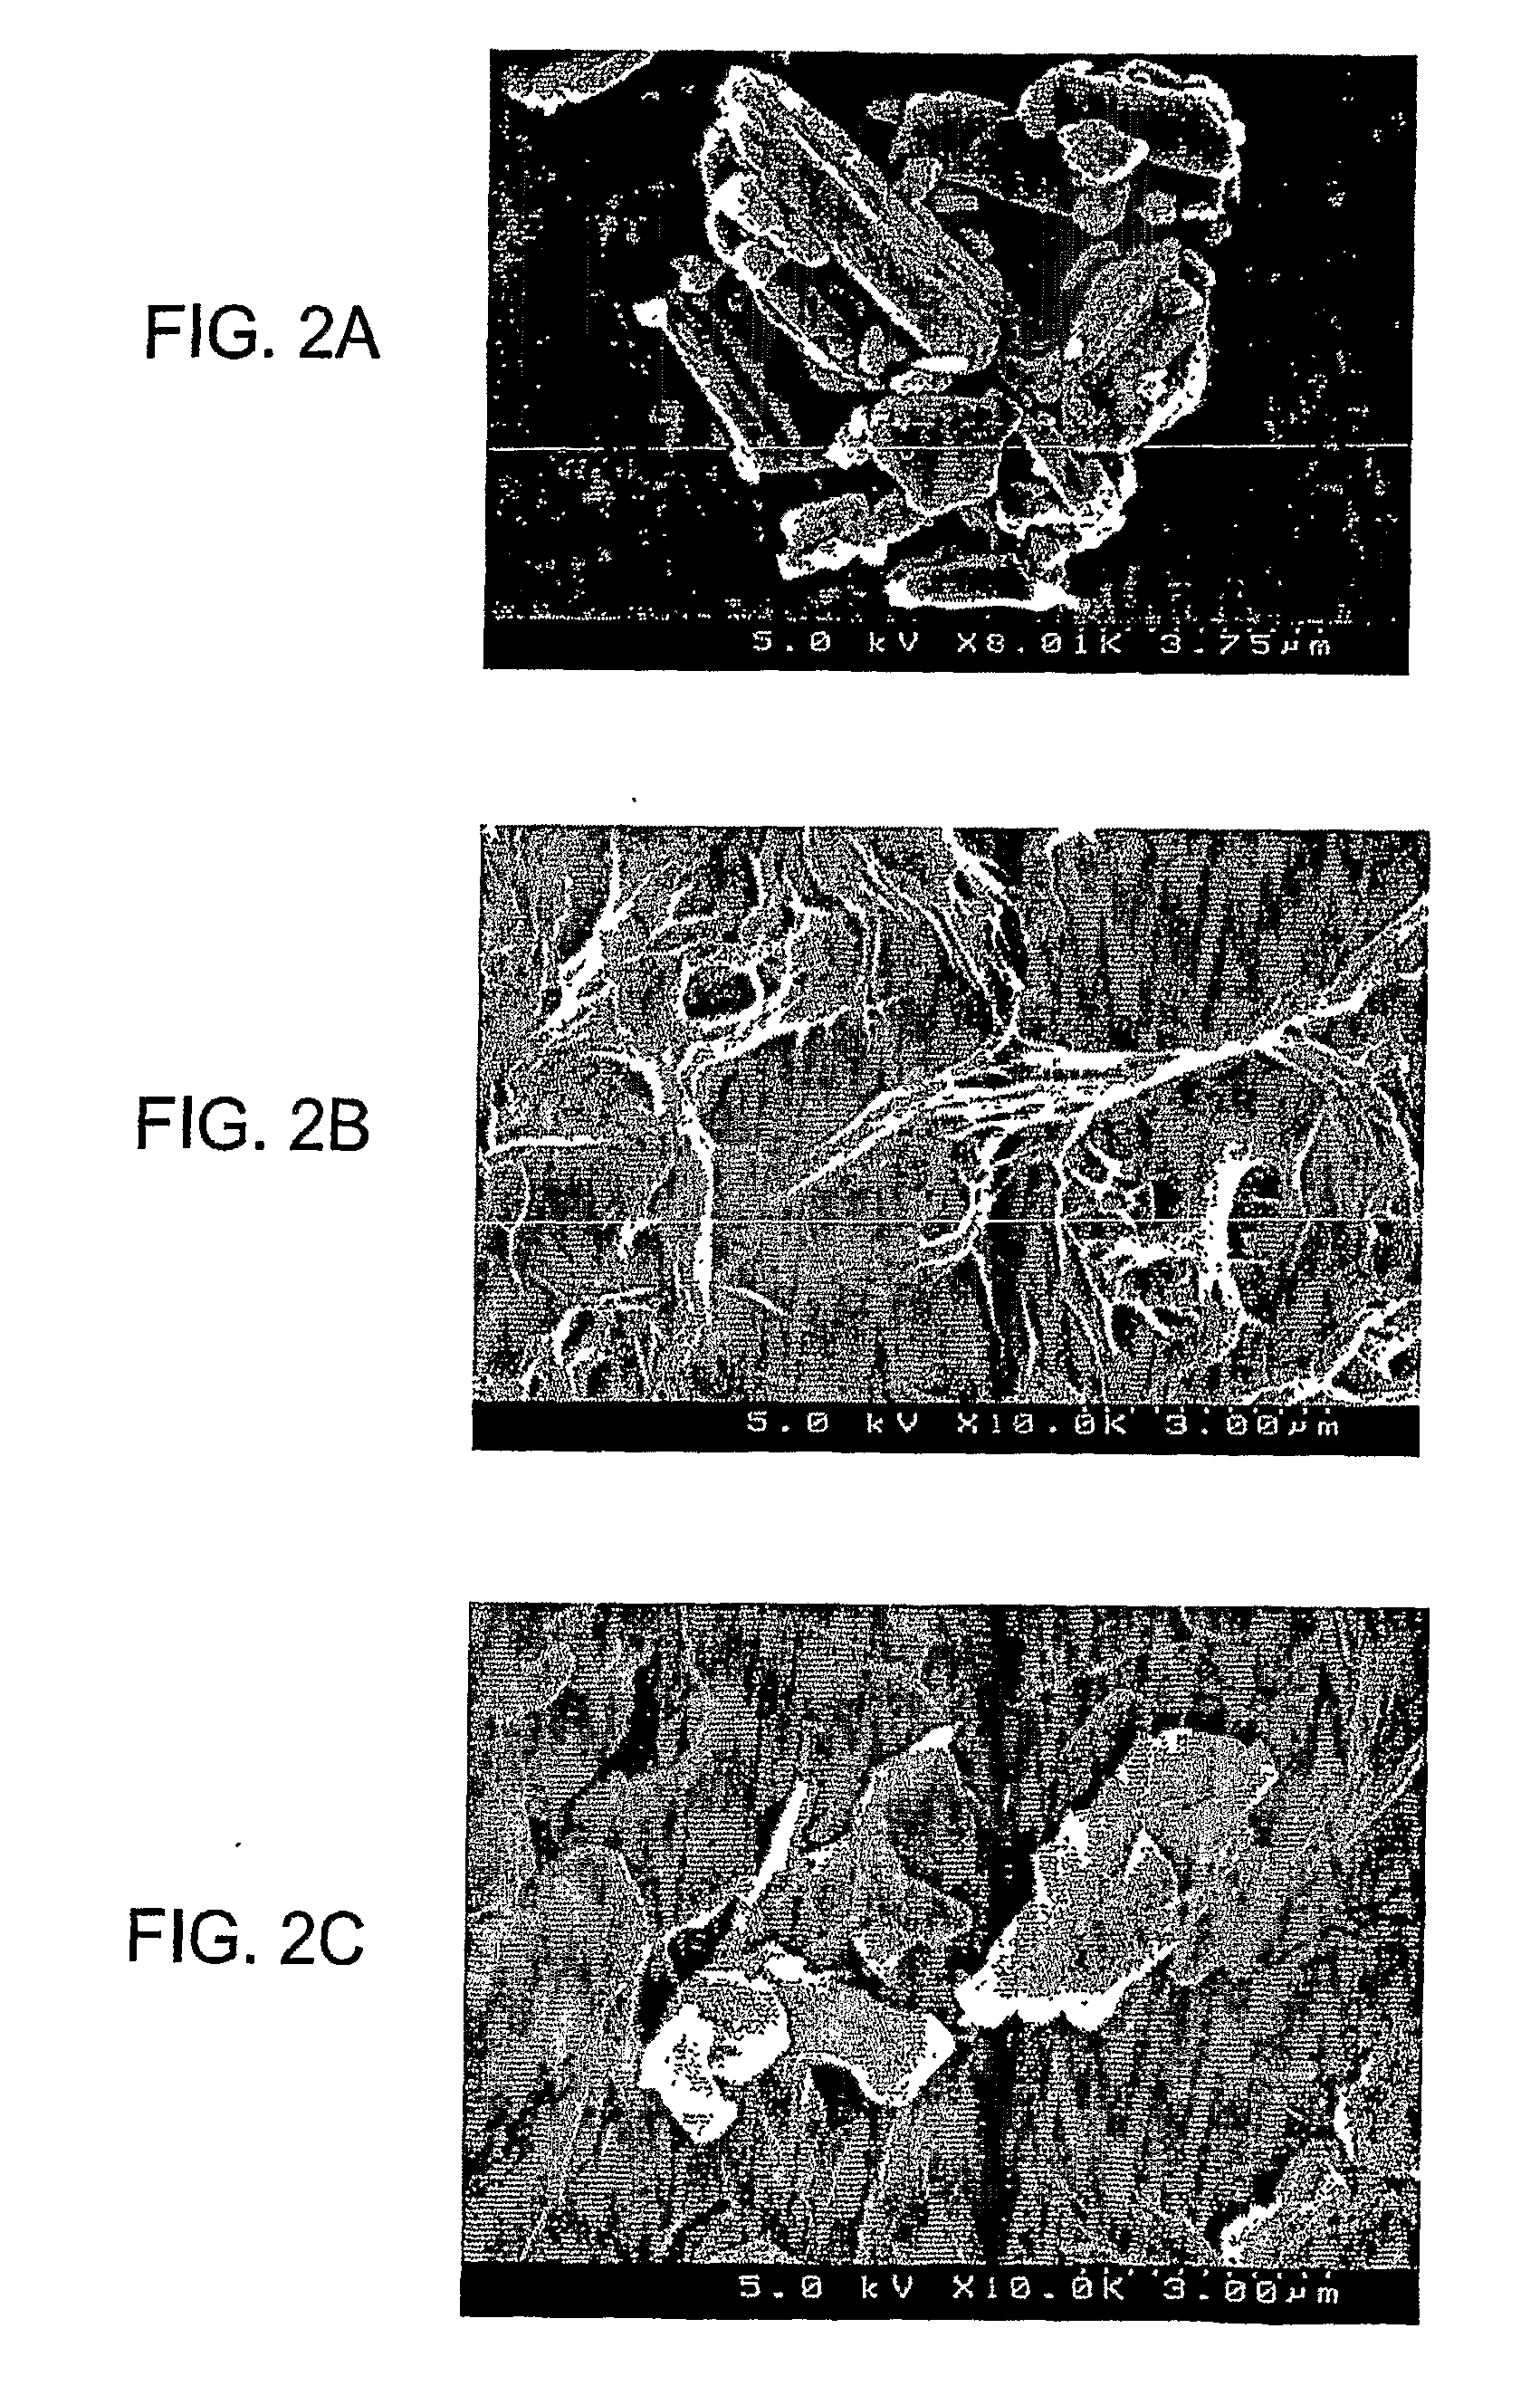 Stabilized Hme Composition With Small Drug Particles